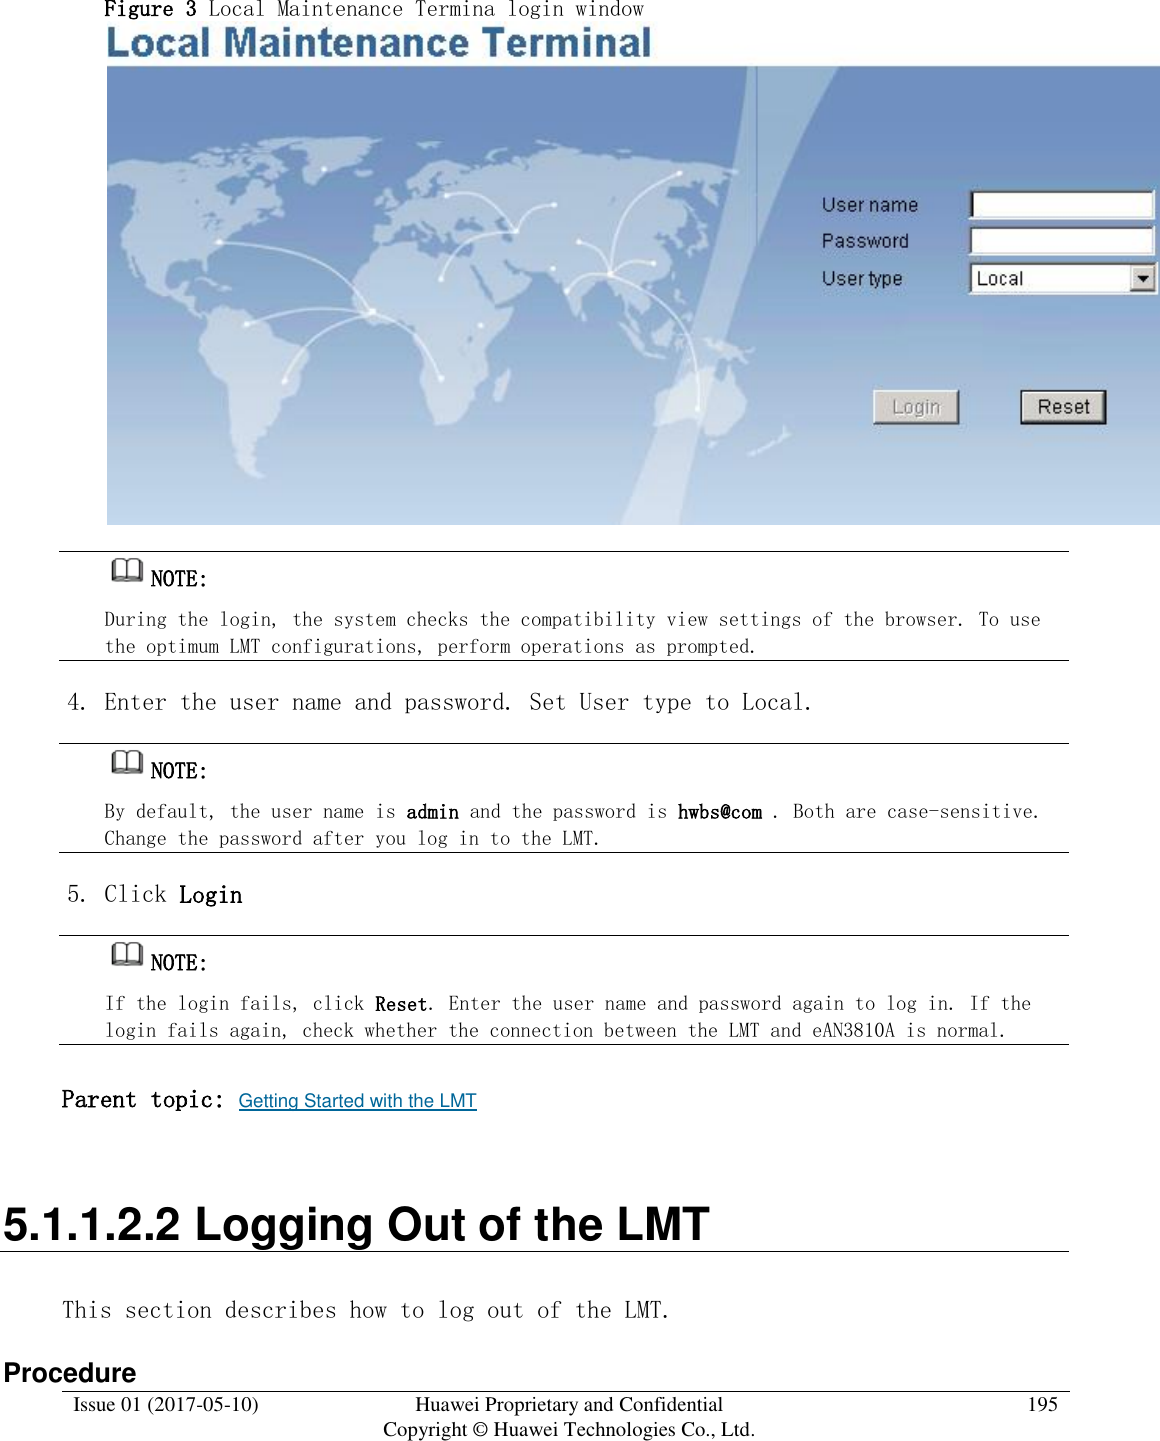  Issue 01 (2017-05-10) Huawei Proprietary and Confidential      Copyright © Huawei Technologies Co., Ltd. 195  Figure 3 Local Maintenance Termina login window   NOTE:  During the login, the system checks the compatibility view settings of the browser. To use the optimum LMT configurations, perform operations as prompted.  4. Enter the user name and password. Set User type to Local.  NOTE:  By default, the user name is admin and the password is hwbs@com . Both are case-sensitive. Change the password after you log in to the LMT.  5. Click Login  NOTE:  If the login fails, click Reset. Enter the user name and password again to log in. If the login fails again, check whether the connection between the LMT and eAN3810A is normal.  Parent topic: Getting Started with the LMT 5.1.1.2.2 Logging Out of the LMT This section describes how to log out of the LMT. Procedure 